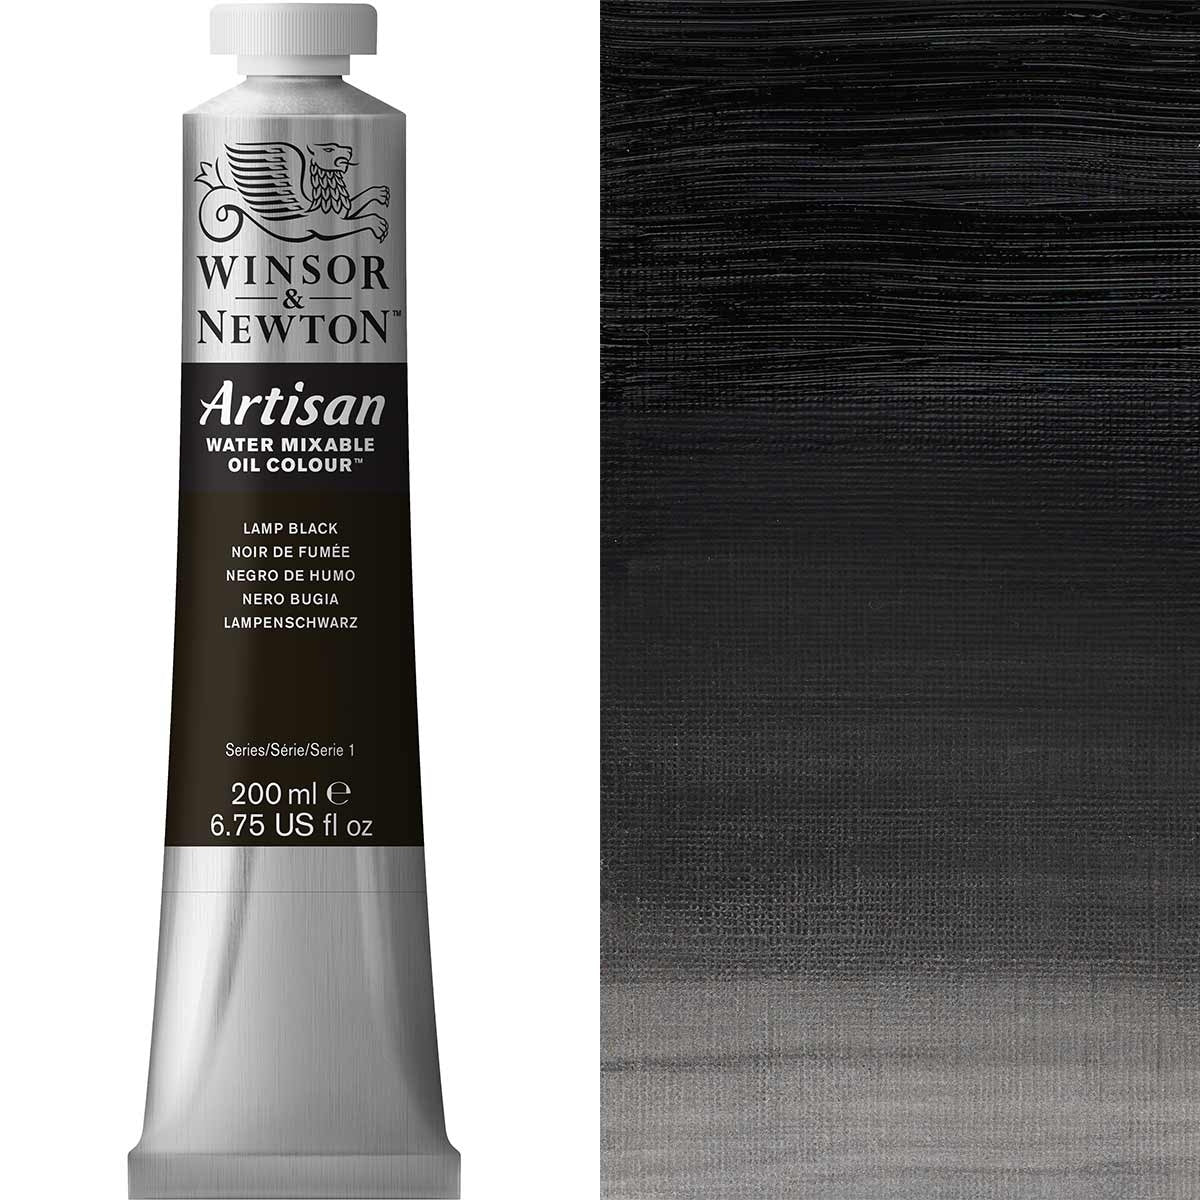 Winsor and Newton - Artisan Oil Colour Watermixable - 200ml - Lamp Black